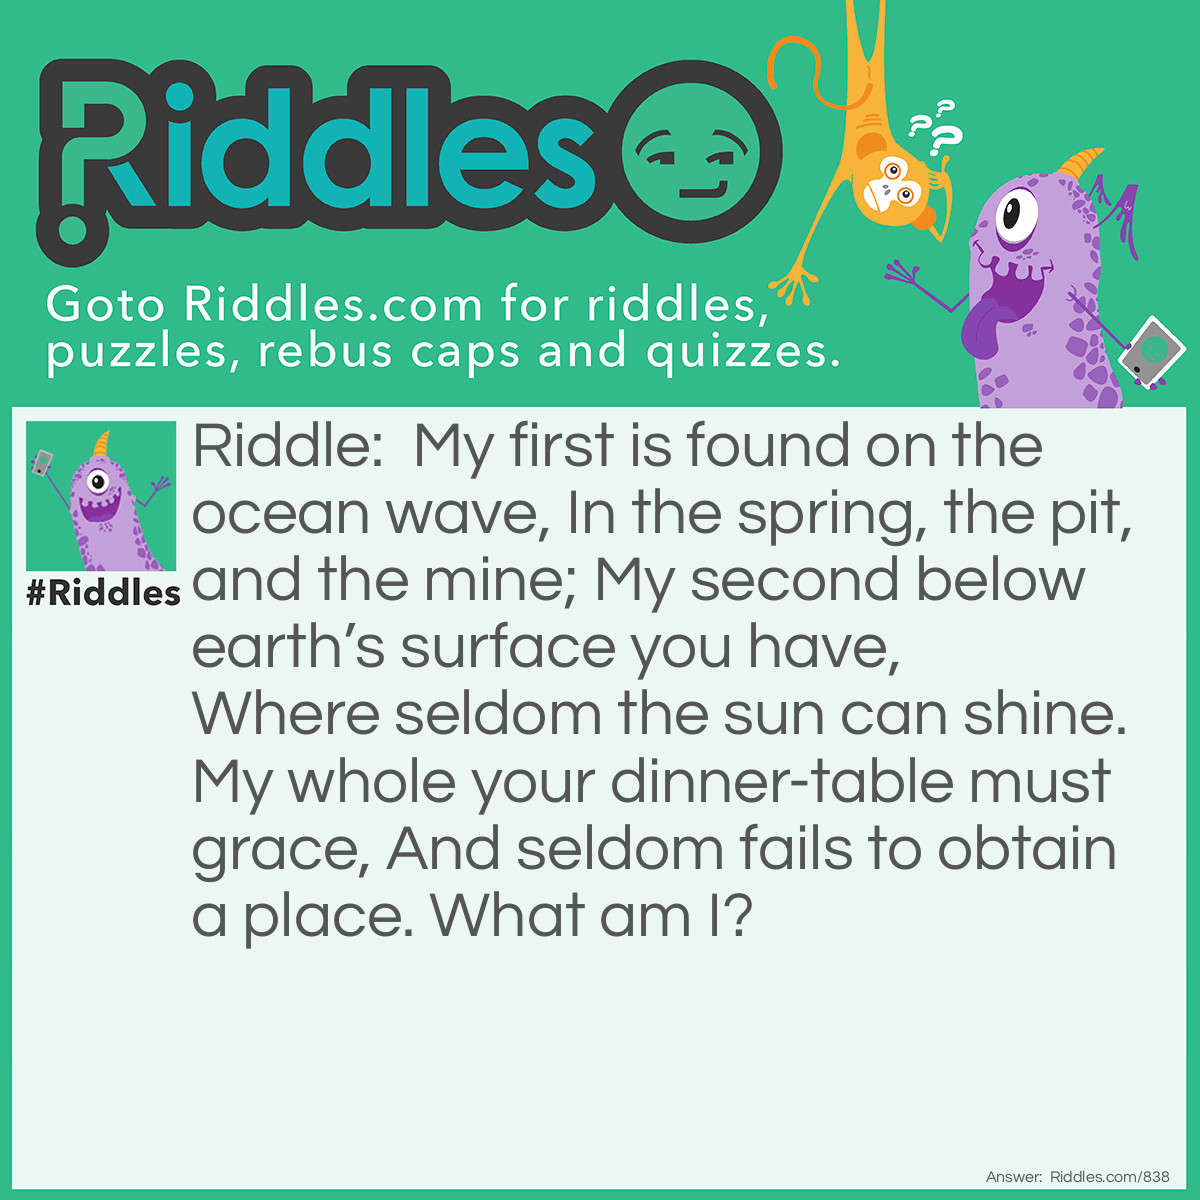 Riddle: My first is found on the ocean wave, In the spring, the pit, and the mine; My second below earth's surface you have, Where seldom the sun can shine. My whole your dinner-table must grace, And seldom fails to obtain a place.
What am I? Answer: Salt-cellar.